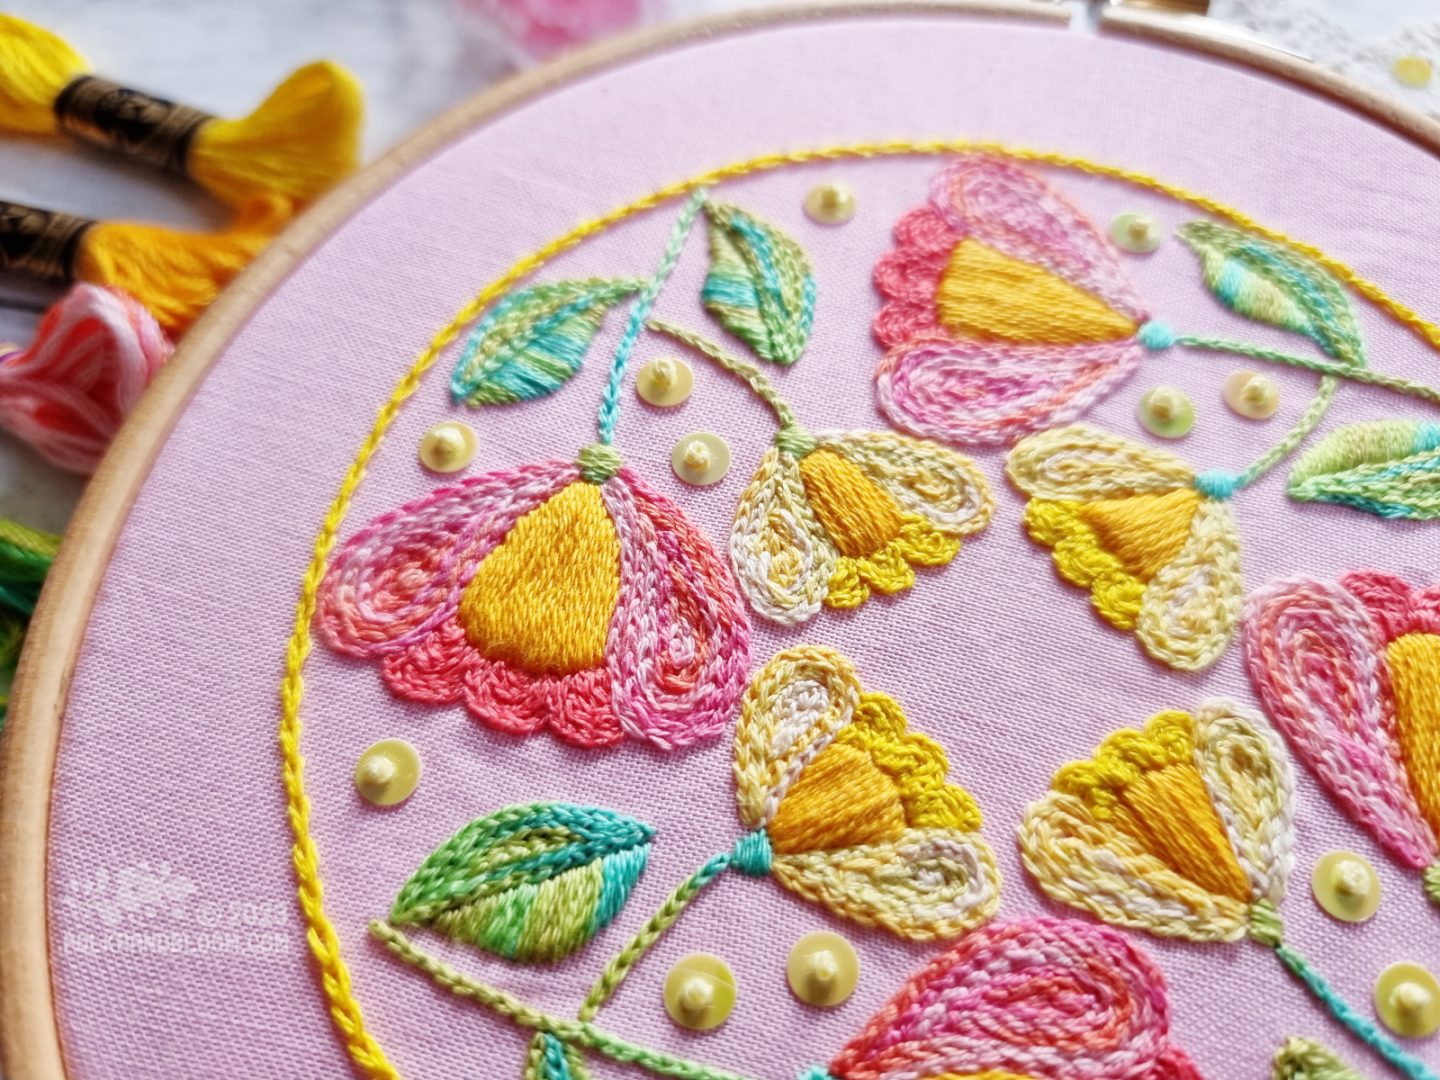 Close up view of an embroidery hoop with light pink fabric. On the fabric is stitched a circular motif with a yellow outline and four folk art inspired tulips inside the outline.